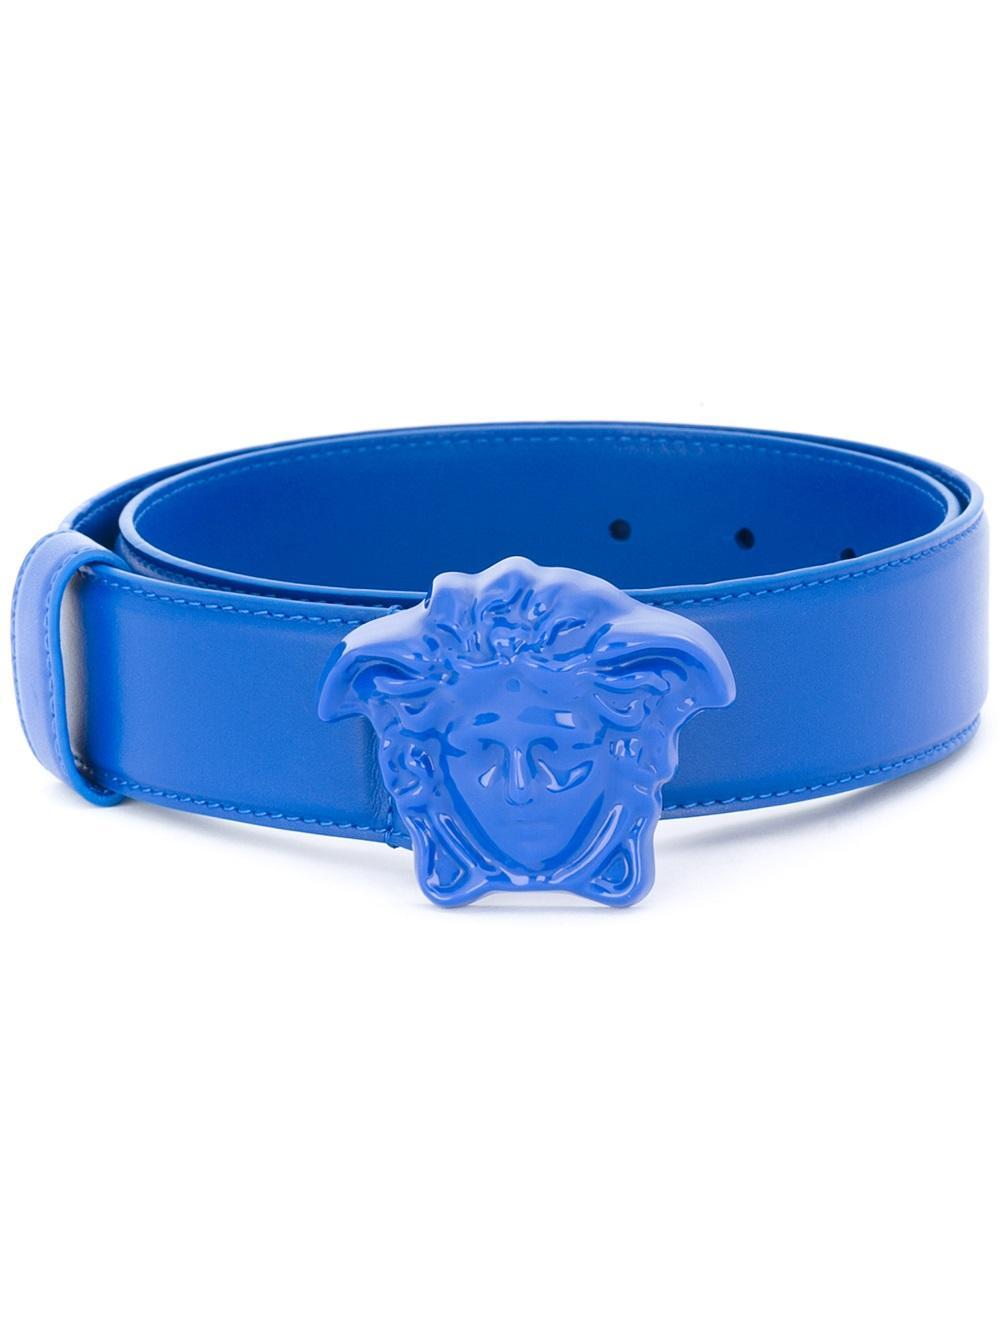 Versace Leather Palazzo Medusa Belt in Blue - Lyst